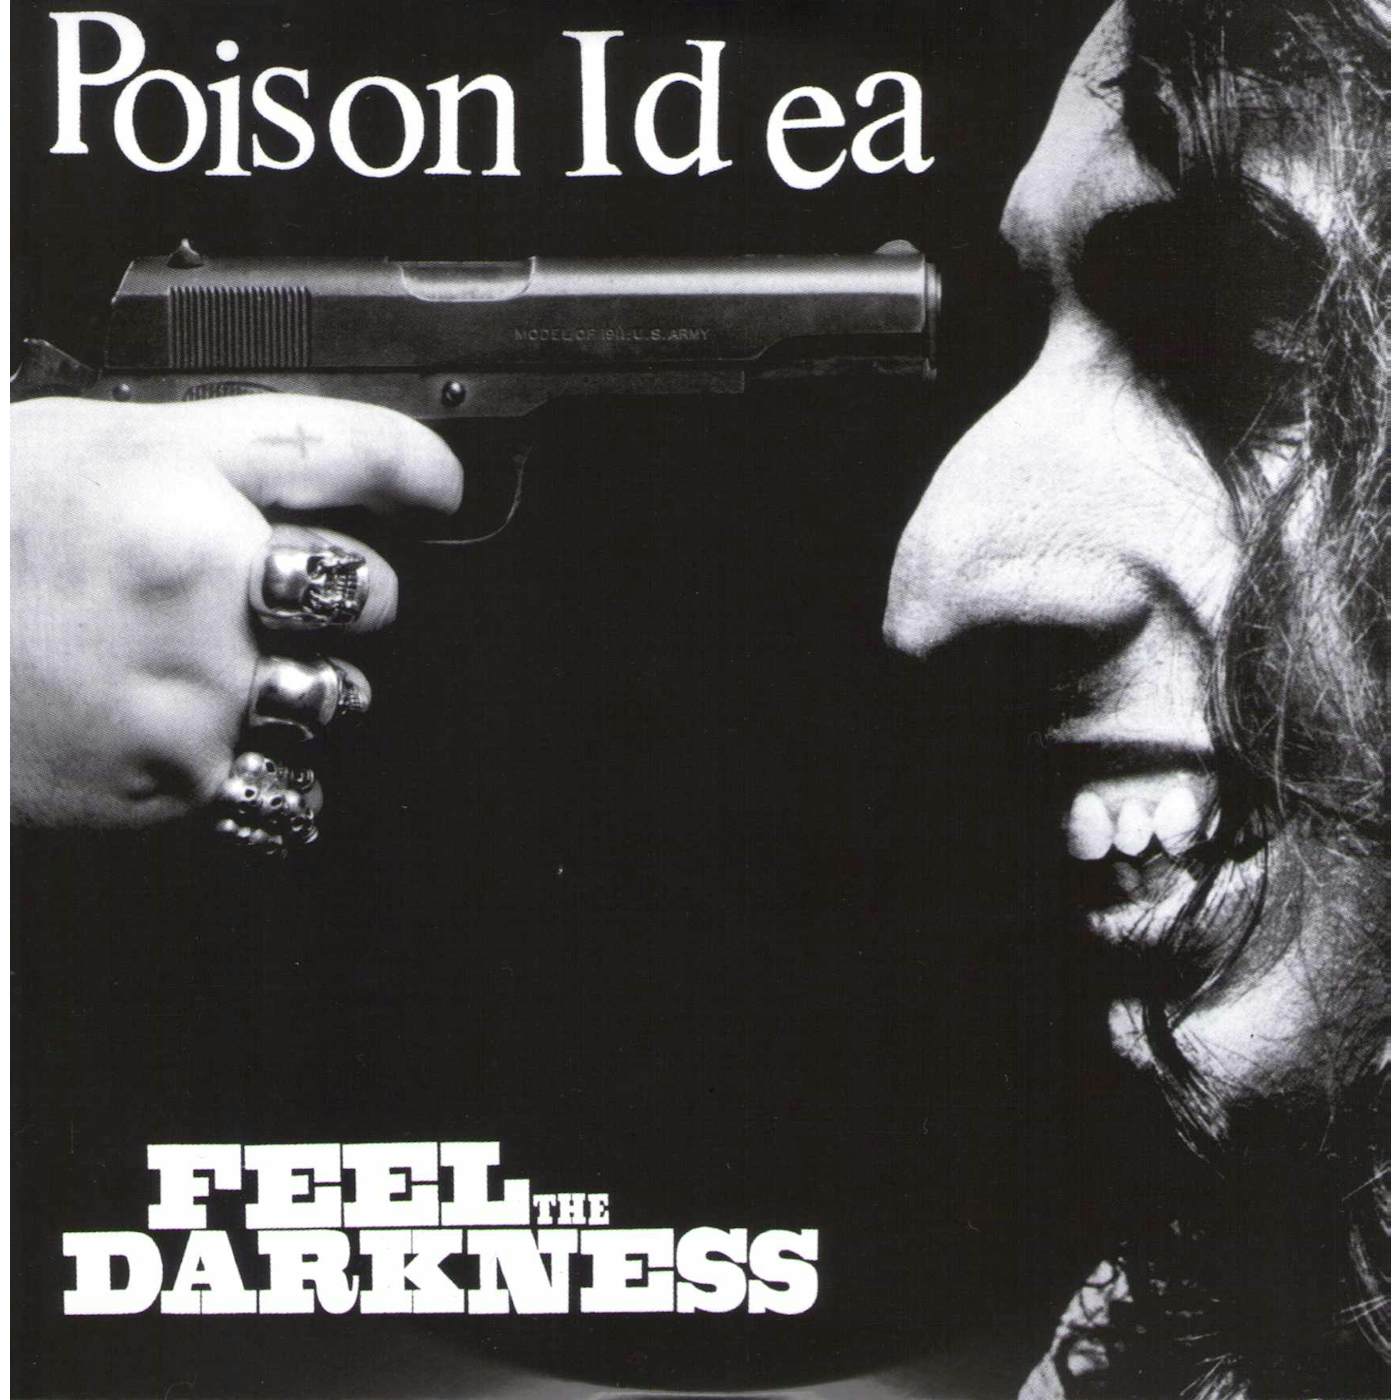 Poison Idea FEEL THE DARKNESS CD